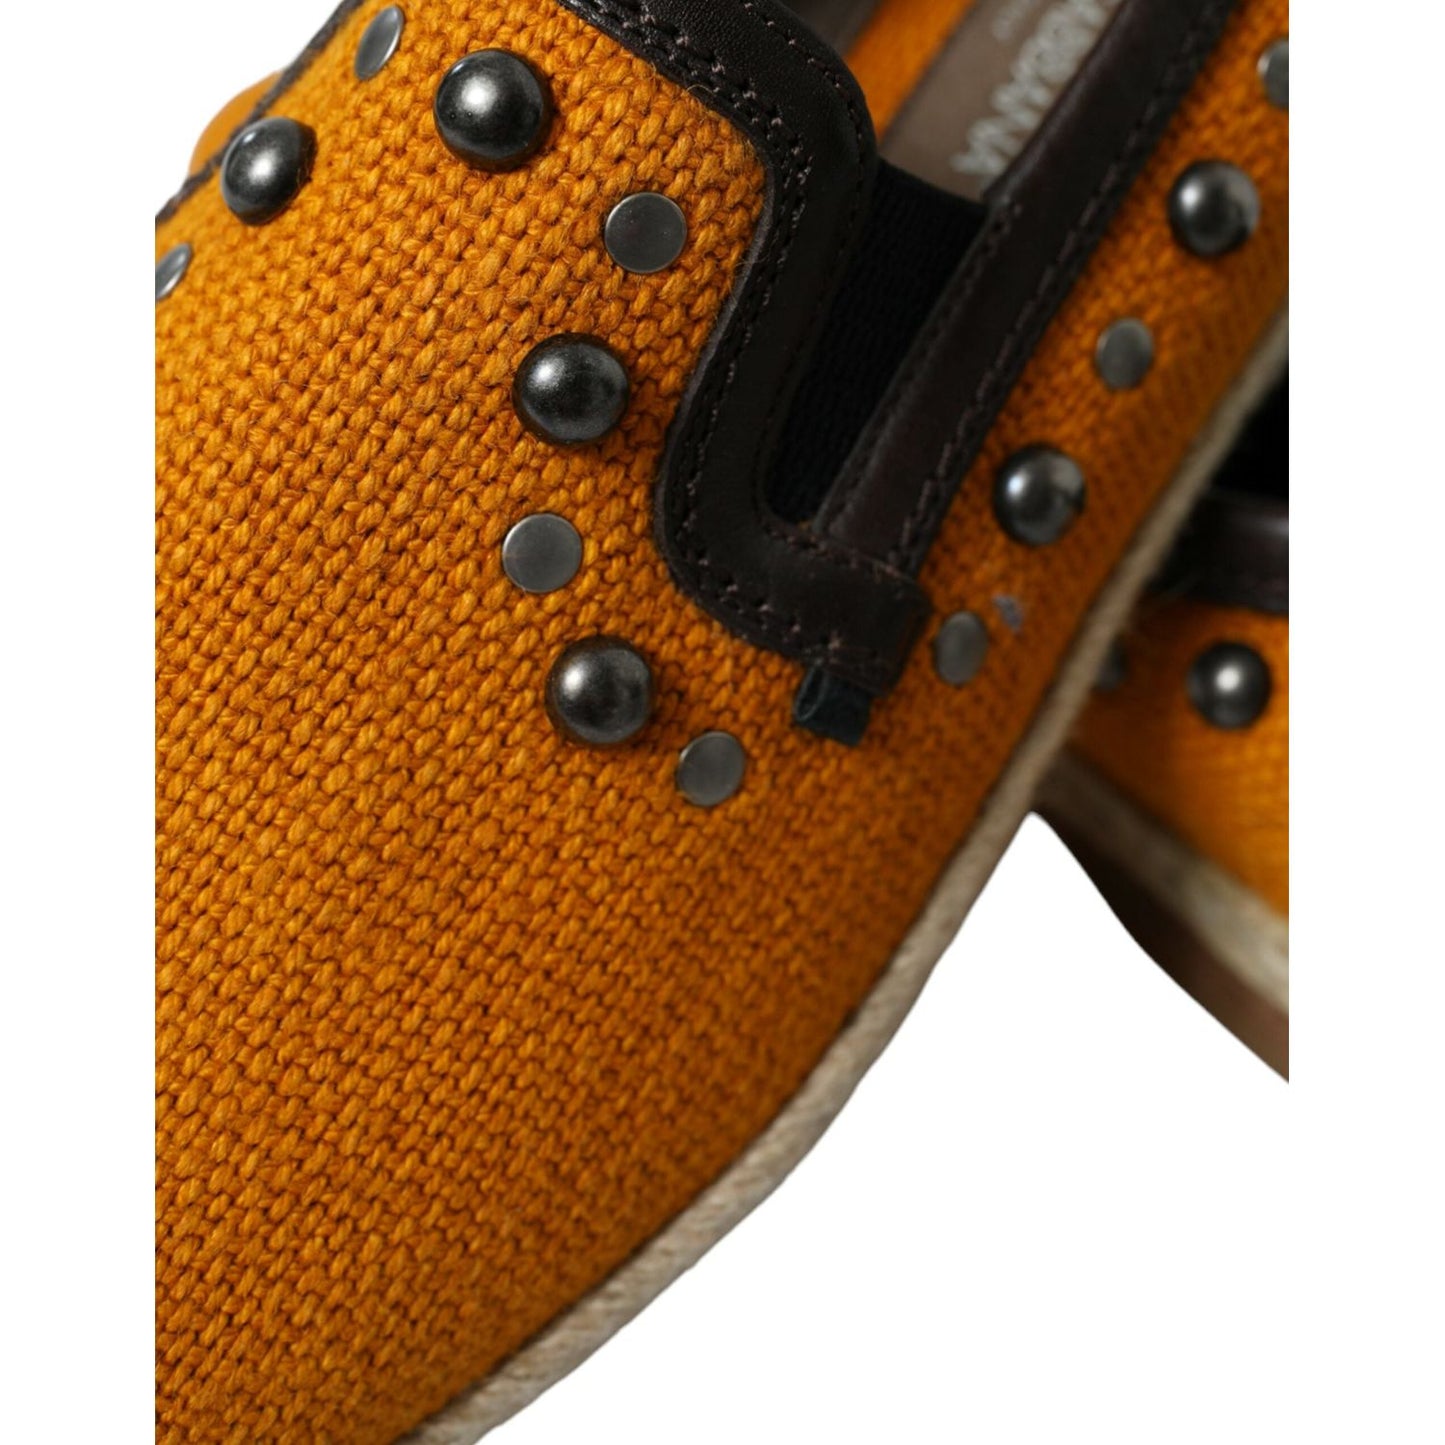 Dolce & Gabbana Exclusive Orange Canvas Loafers with Studs orange-linen-leather-studded-loafers-shoes